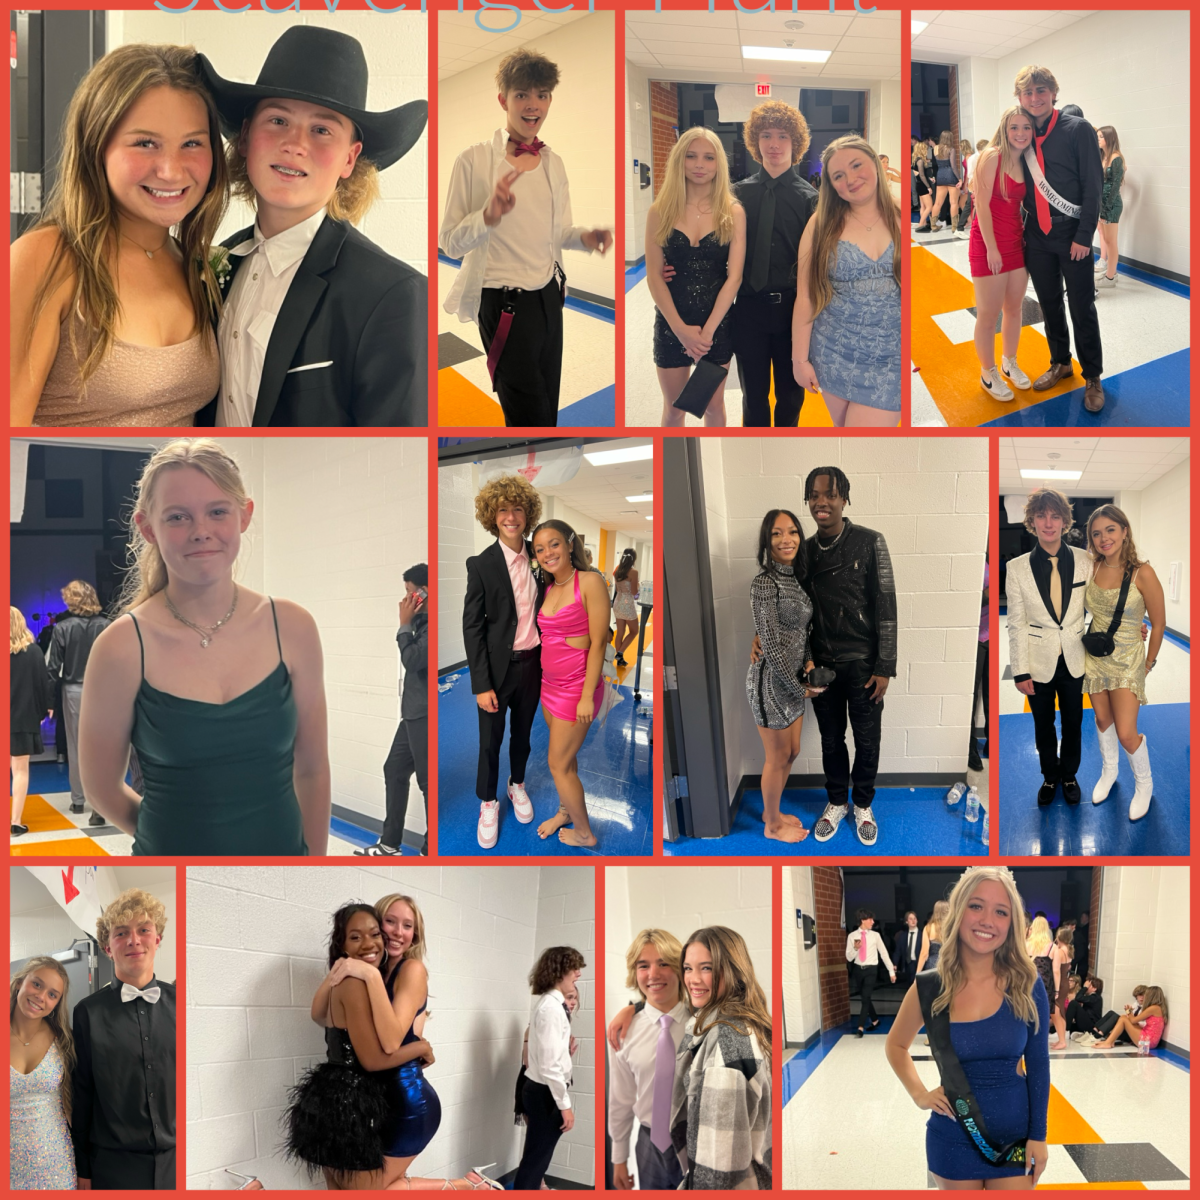 The Disco-theed HOCO dance was a hit this year with over 1100 students attending.